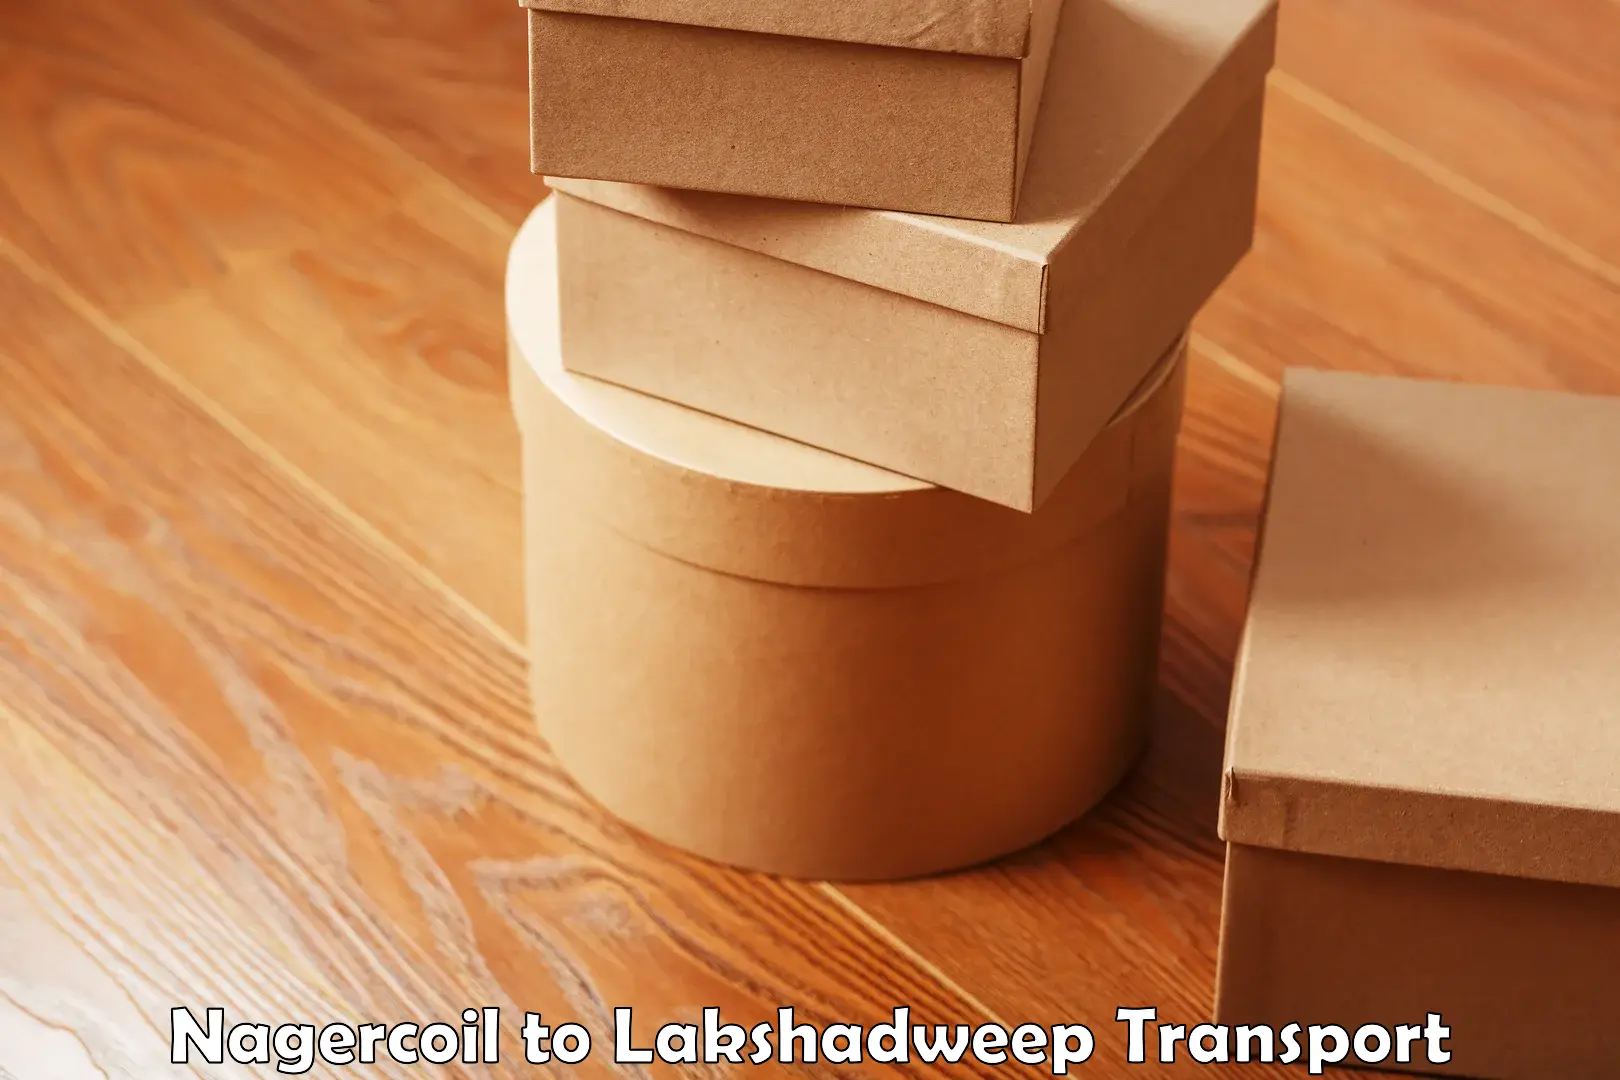 Daily parcel service transport Nagercoil to Lakshadweep